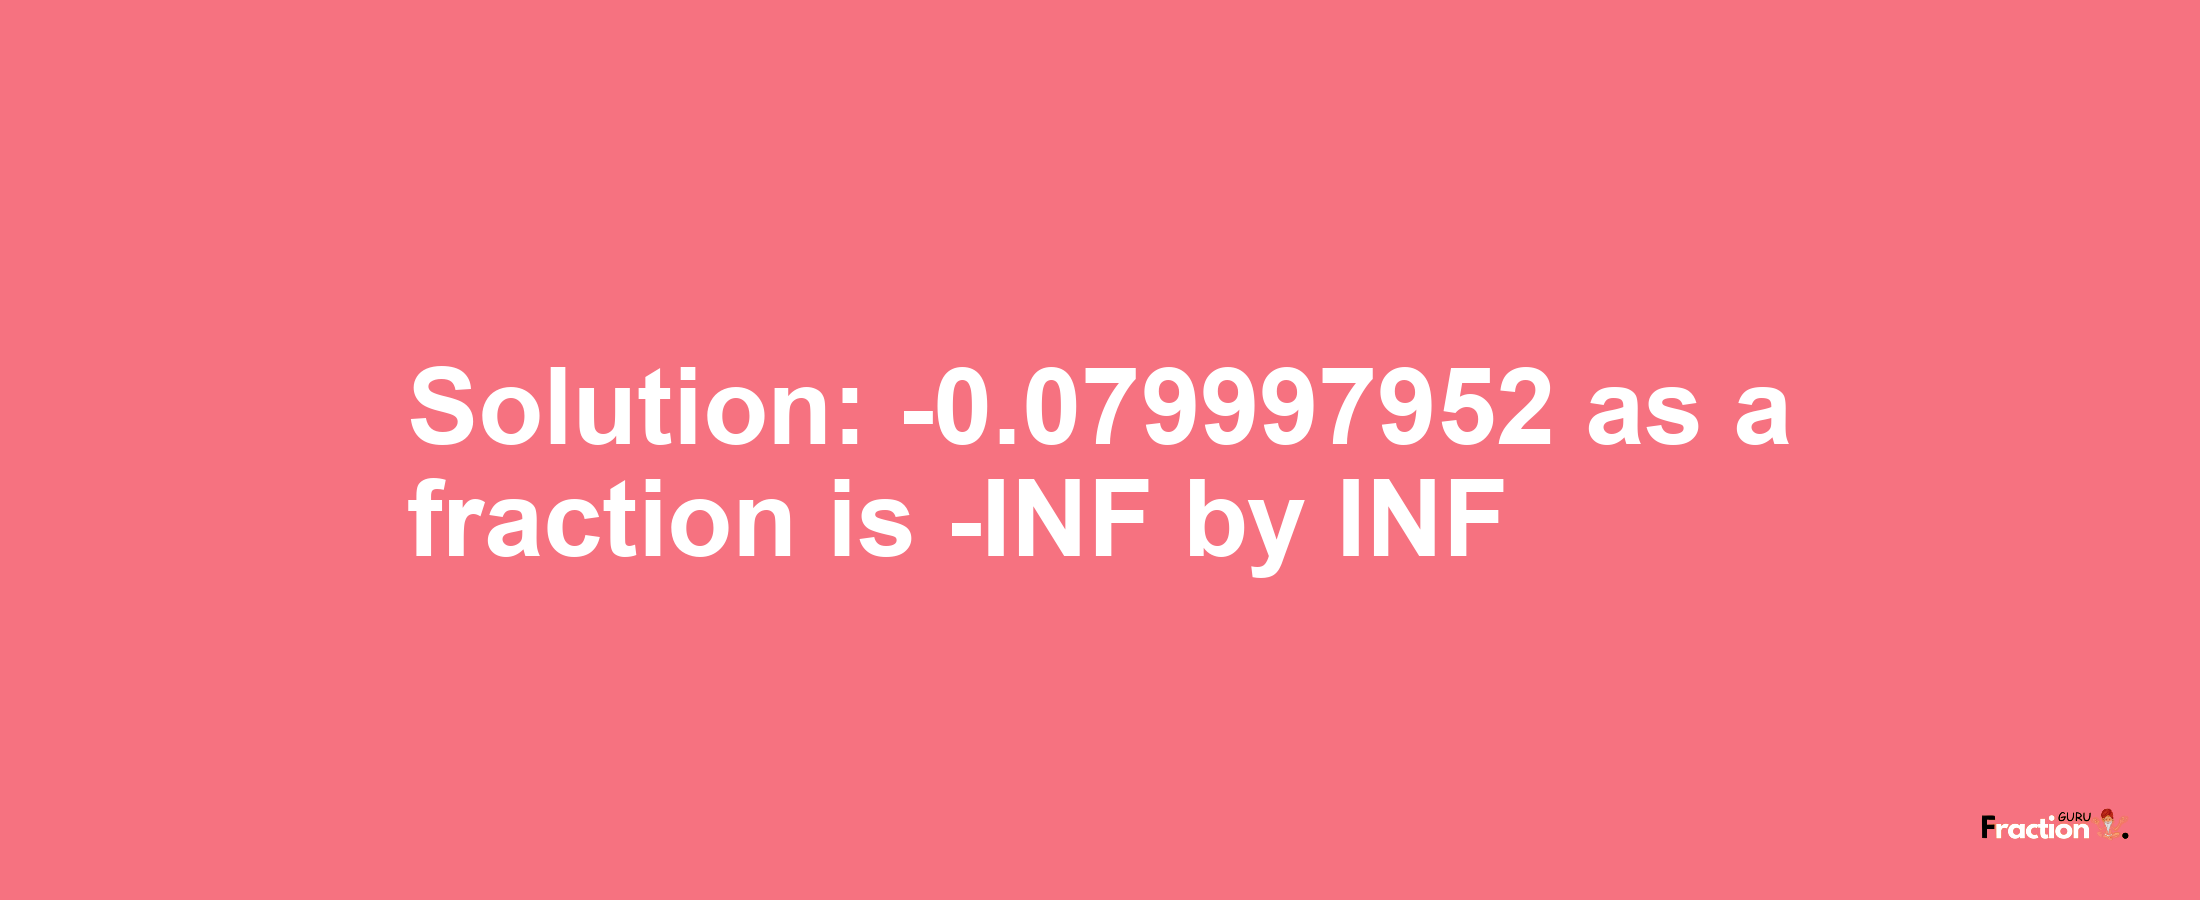 Solution:-0.079997952 as a fraction is -INF/INF